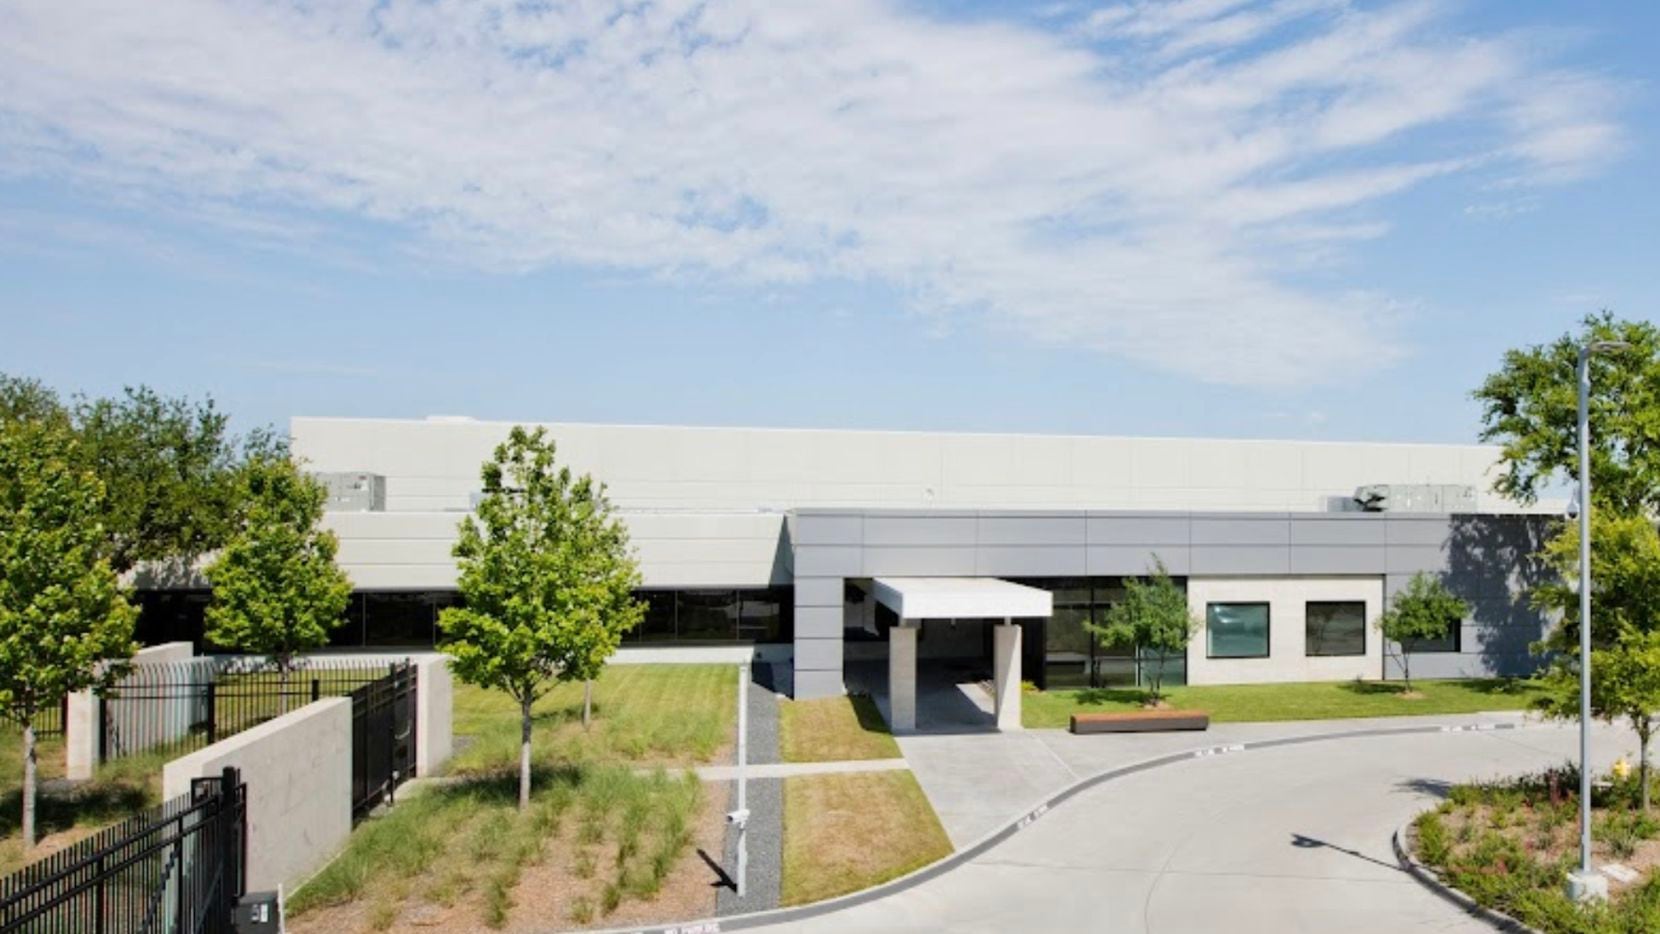 Aligned Data Centers is almost tripling the size of its Plano campus.